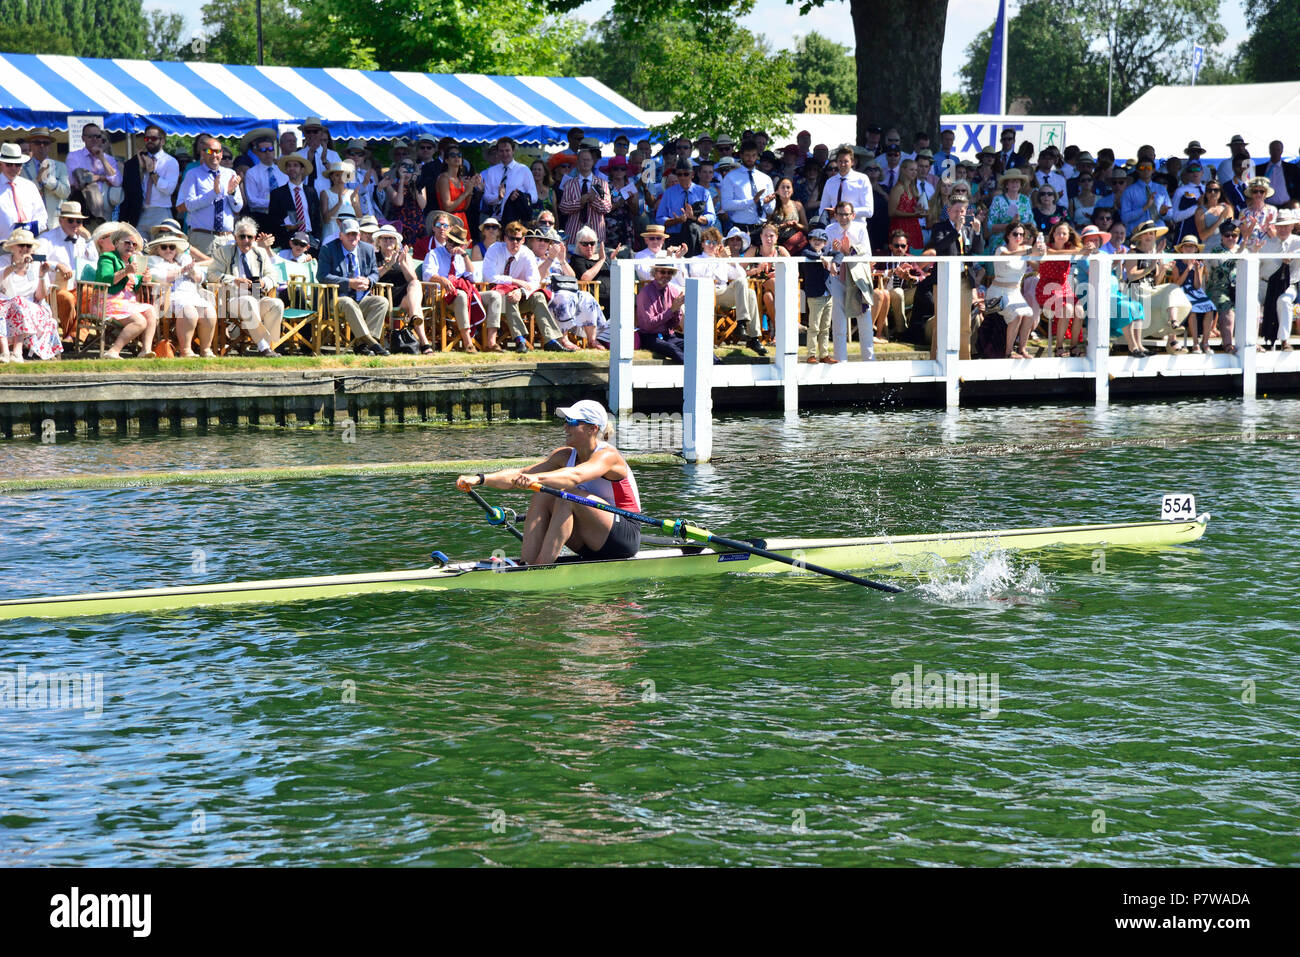 Henley-on-Thames, UK. 08th July, 2018. In the Princess Royal J.R. Gmelin from Switzerland beat Madeleine Edmunds from the Georgina Hope Rinehart National Training Centre, Australia. Again records were broken with Gmelin breaking the Fawley record by three seconds and smashing the course record by four seconds. Credit Wendy Johnson/Alamy Live News Stock Photo